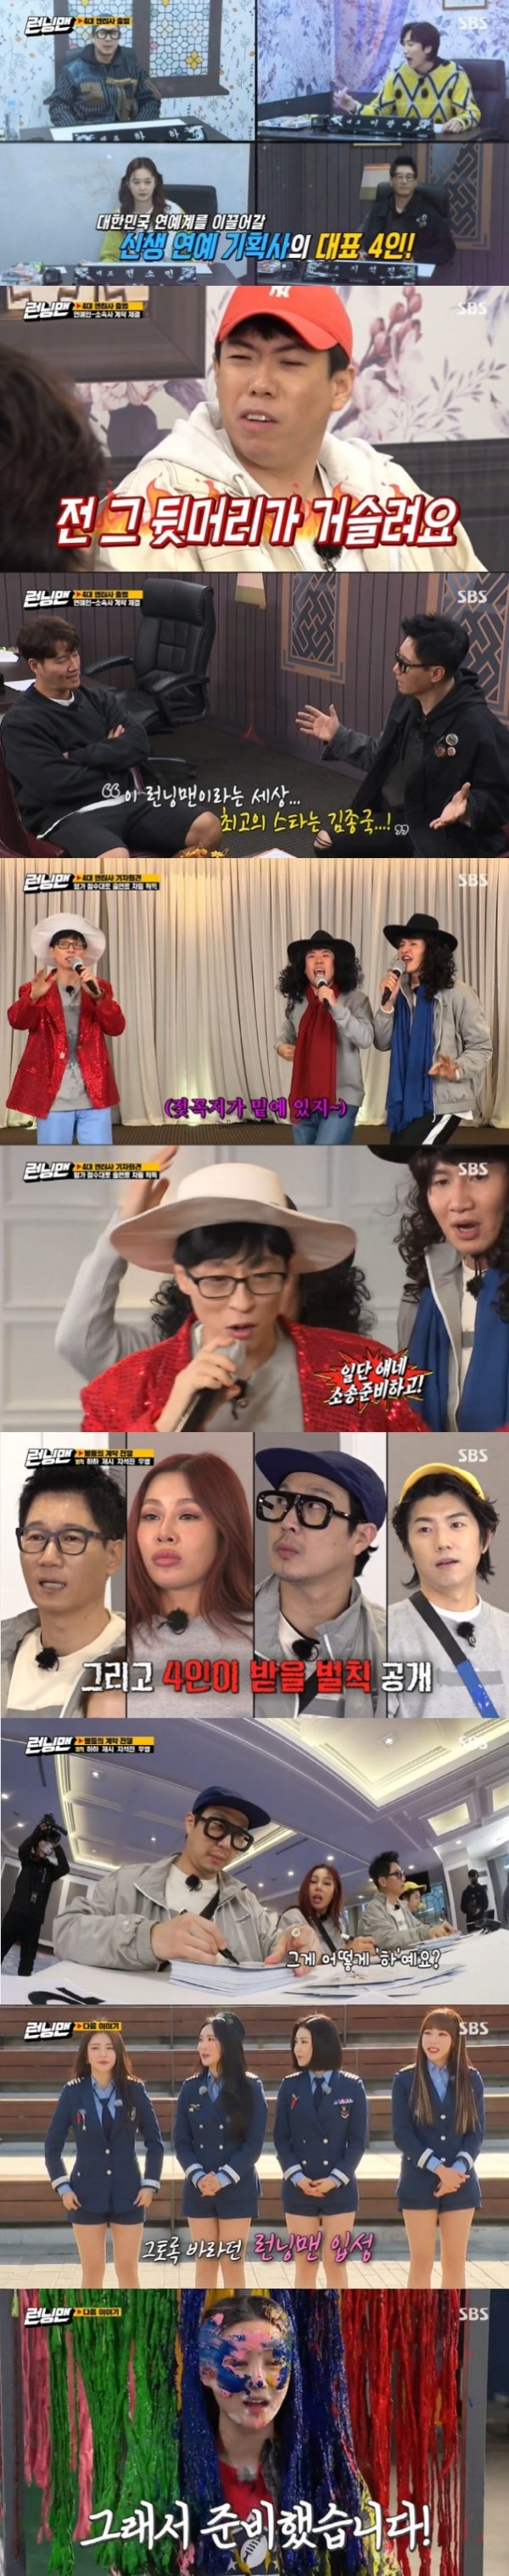 SBS Running Man showed an increase in ratings.On this day, Race was decorated with Contract War of the Stars Race, and Jessie and Wooyoung were invited as guests, while Haha, Lee Kwang-soo, Ji Suk-jin and Jeon So-min turned into entertainment representatives.Representatives had to succeed in the contract to cooperate with entertainers and distribution of profits, and the sparkling contract war was held from the beginning.In particular, Lee Kwang-soo surprised everyone by actually cutting his back hair at the end of Yang Se-chan, saying, I will contract if I cut the back.At the subsequent recontract time, Ji Suk-jins agency was closed down without a contract, and Ji Suk-jin signed a contract with J Enter (Jeon So-min).The members missed the correct answer by revealing the knowledge base in the next mission, Yaja Golden Bell, and Jessie and Wooyoung were also surprised by the problems of the Russian Presidents full name and the Argentine capital.As a result of the final mission, Running Entertainment Hall, Jeon So-min was ranked first among the three representatives and Song Ji-hyo was ranked first in entertainers.The scene was the highest audience rating of 8% per minute, with Wooyoung, Jessie and Ji Suk-jin being penalized.Four people, including the representative Haha, signed 100 autographs with penalties.On the other hand, the Running Man, which will be broadcast on the 4th of next month, will be launched by the Reverse Icon Brave Girls, and will perform Brave Idol Day Race.